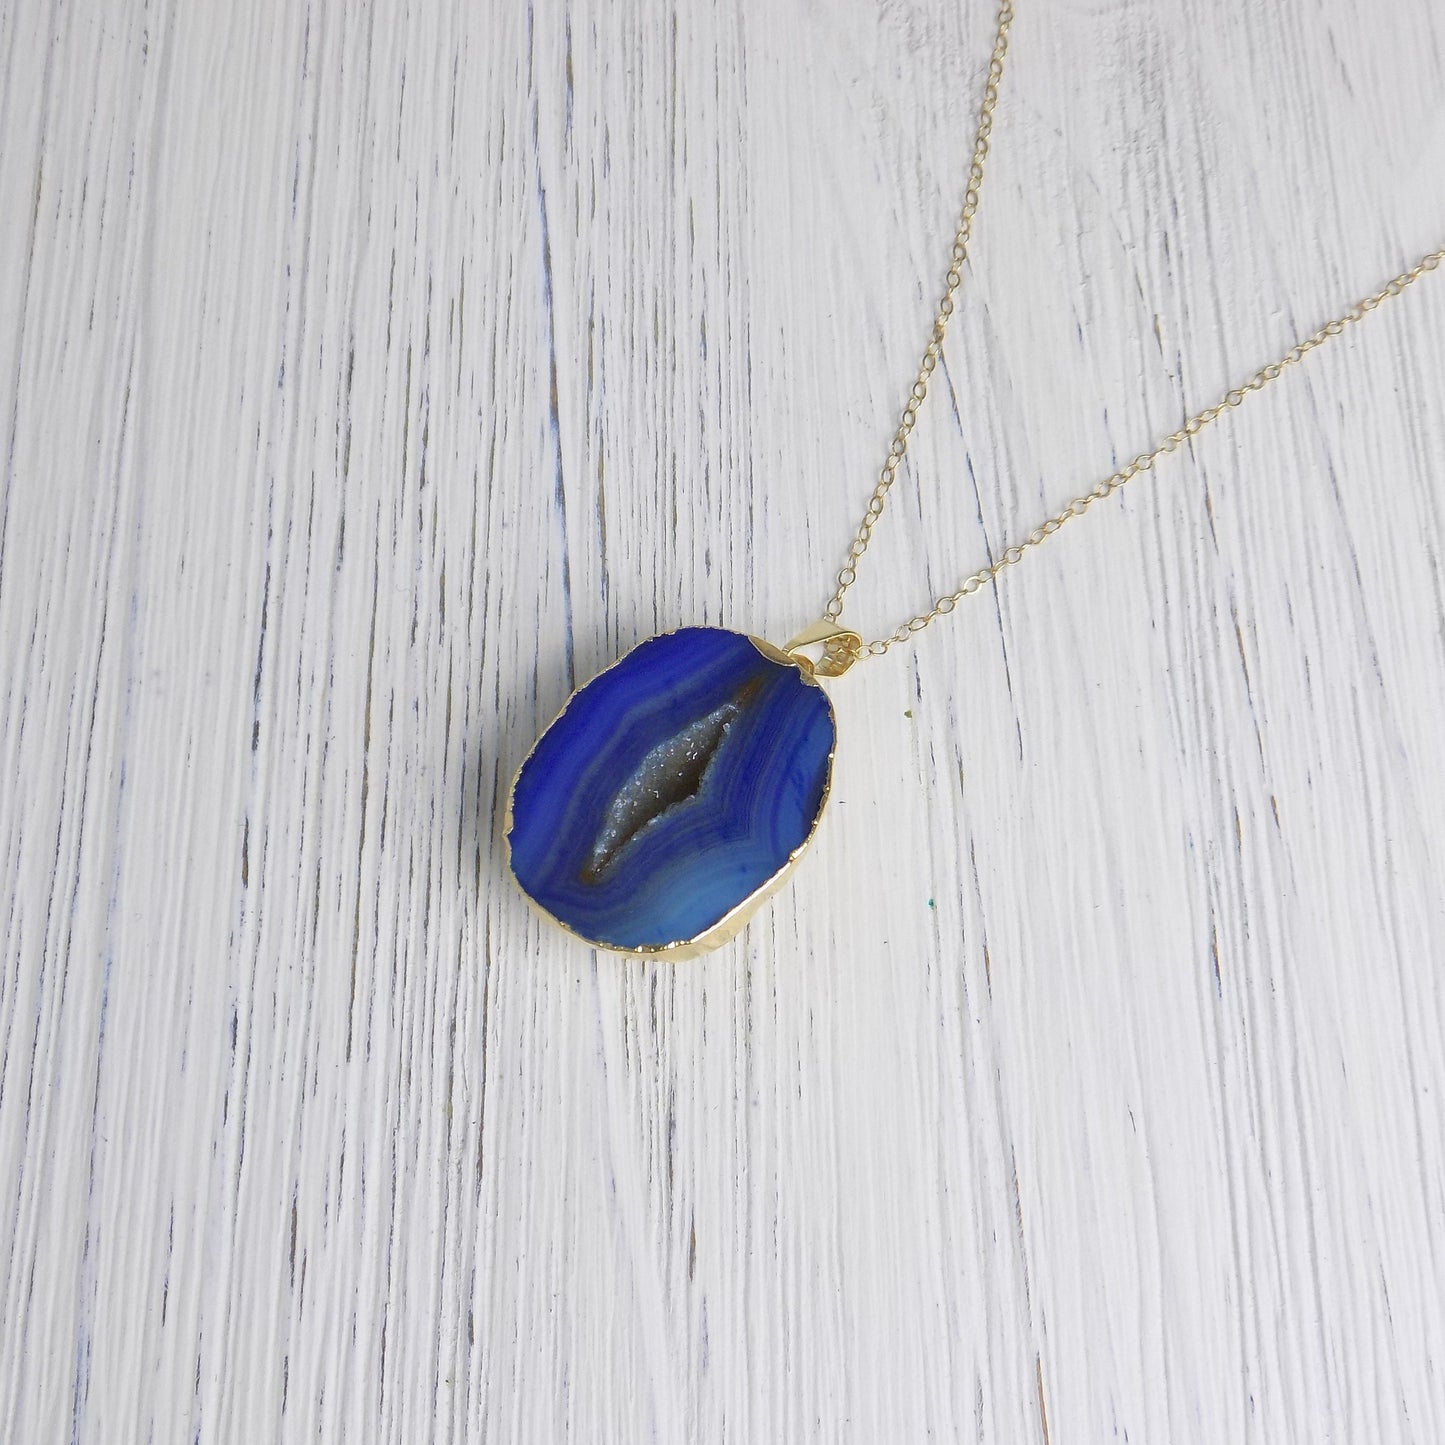 Gift Women, Geode Necklace, Blue Druzy Necklace, Slice Agate Necklace, Gemstone Necklace, Boho Necklace, Gold Layer, Stone Necklace G14-732